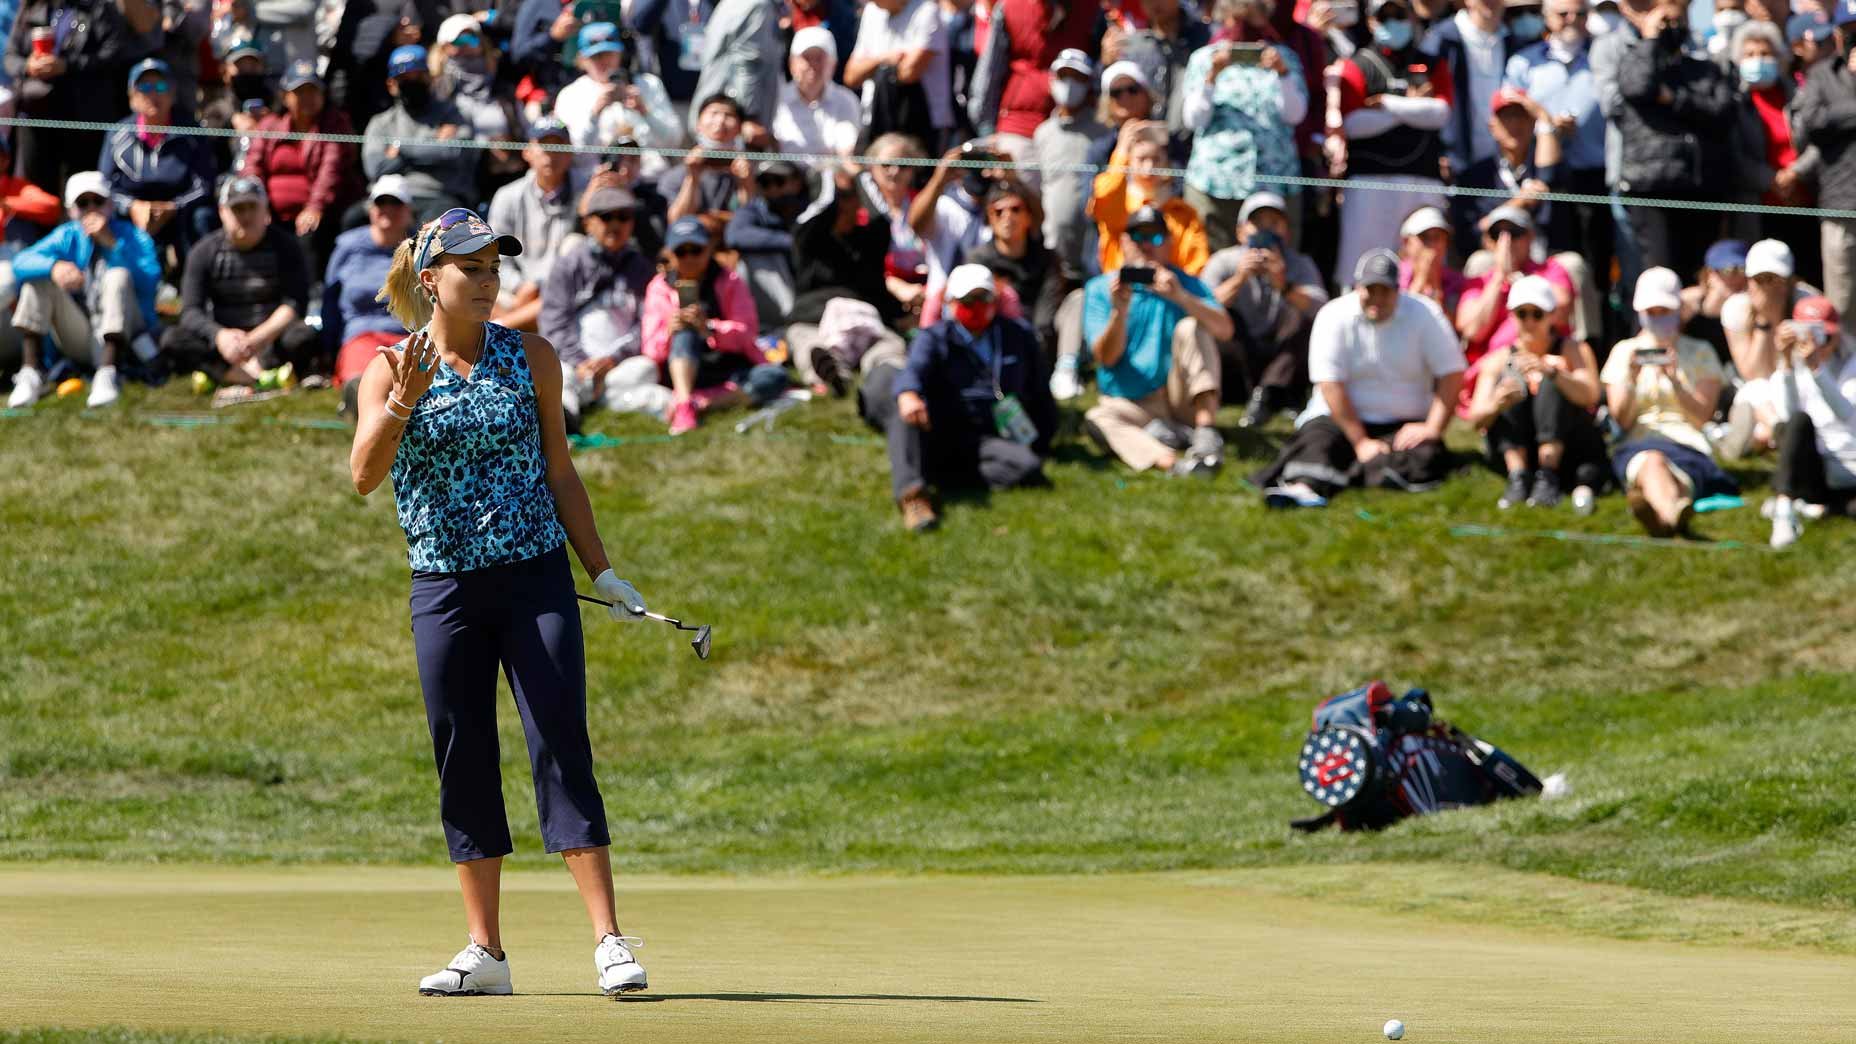 Inside Lexi Thompson’s collapse: How her U.S. Women’s Open lead evaporated